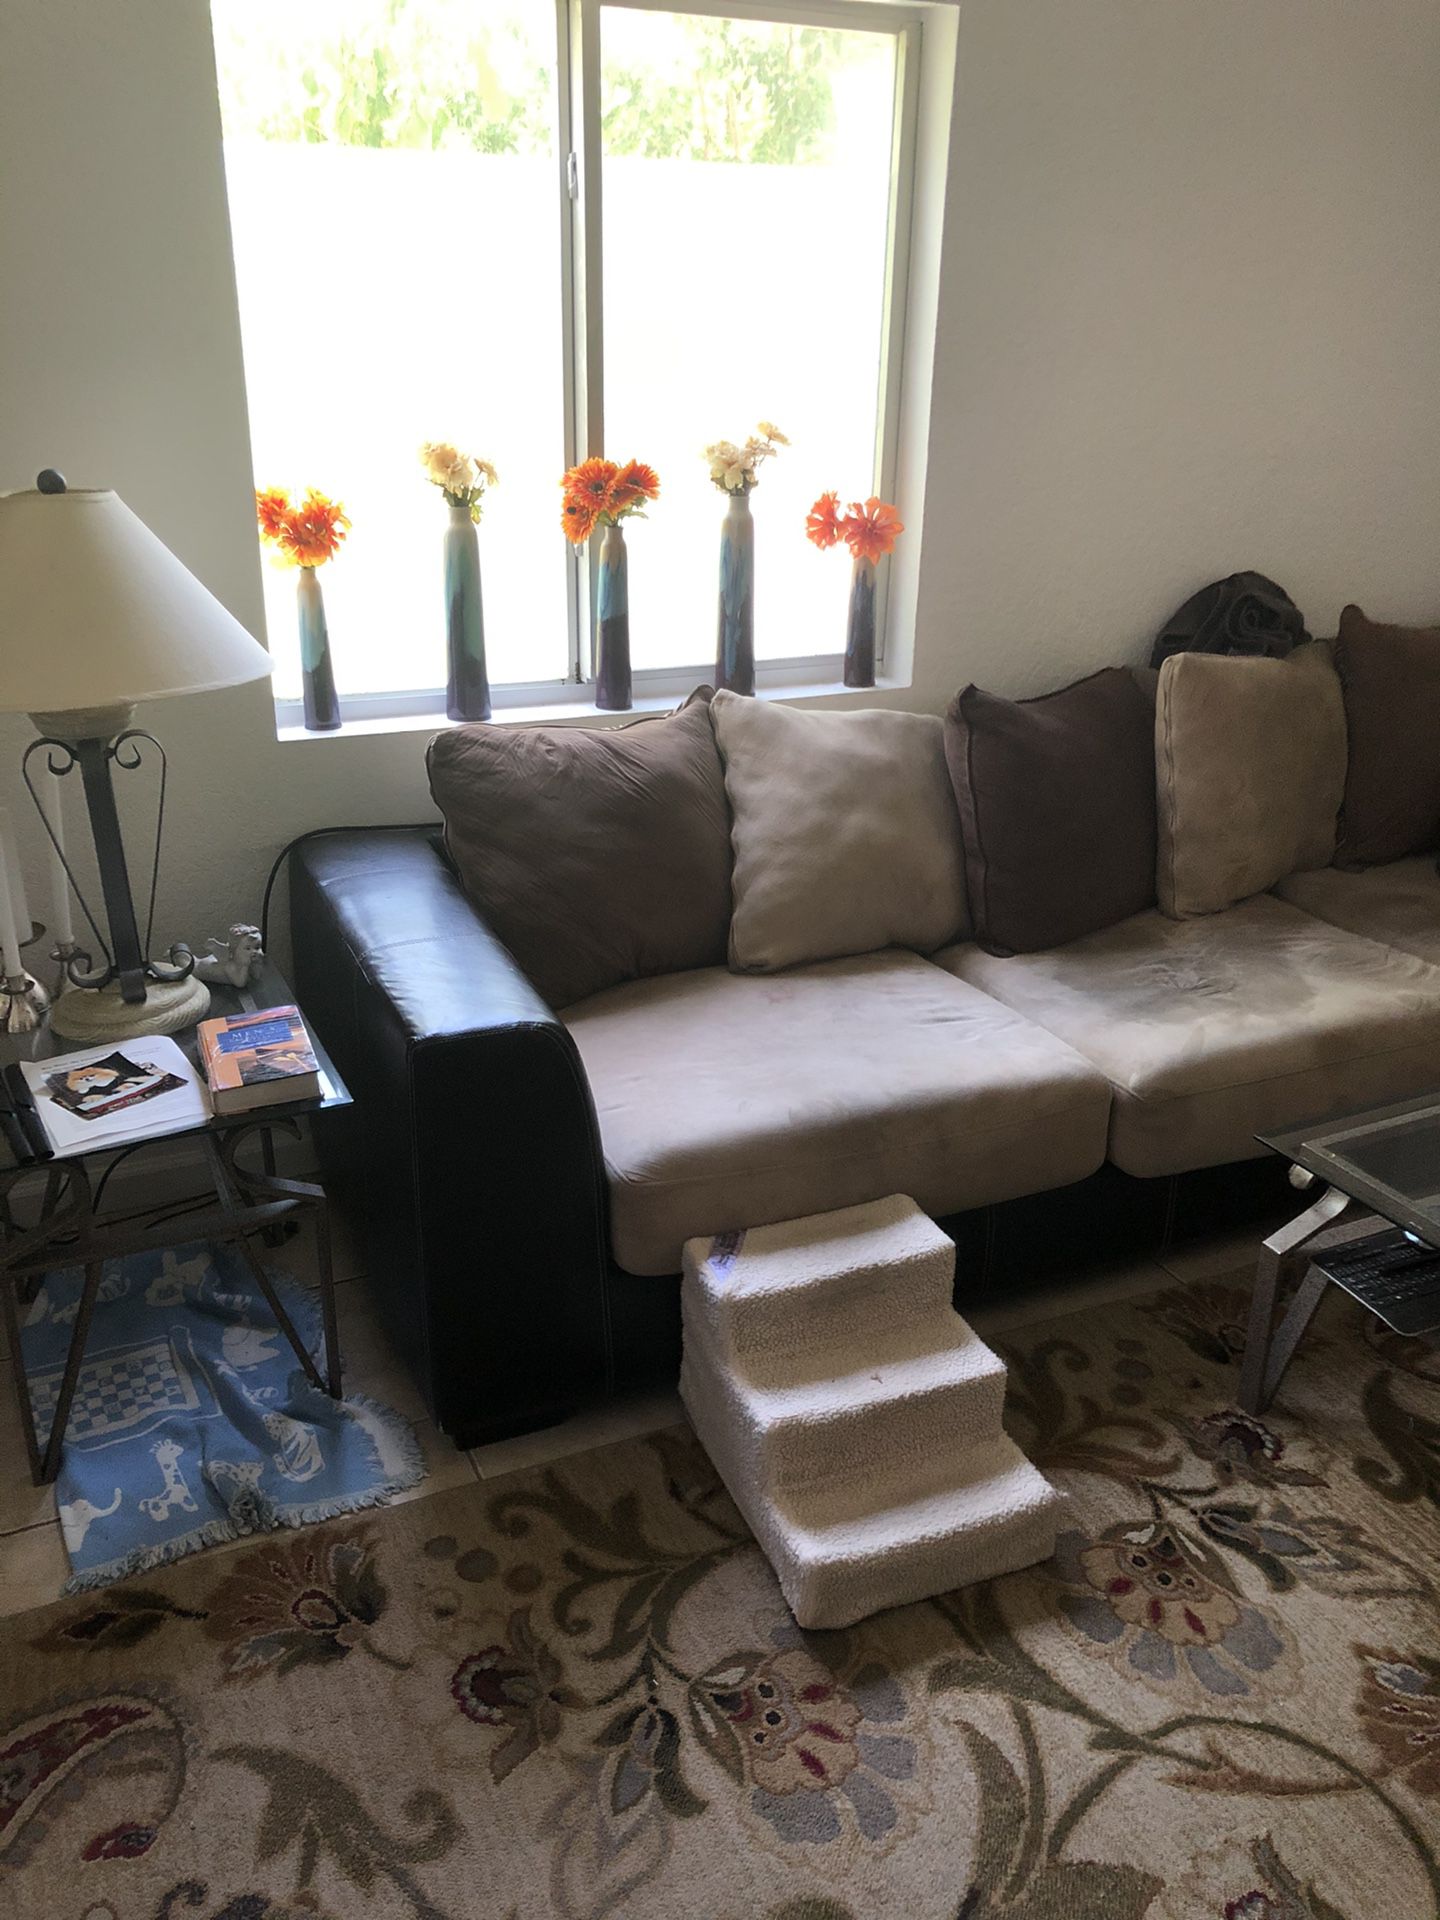 FREE TODAY ONLY! Full Living Room Set